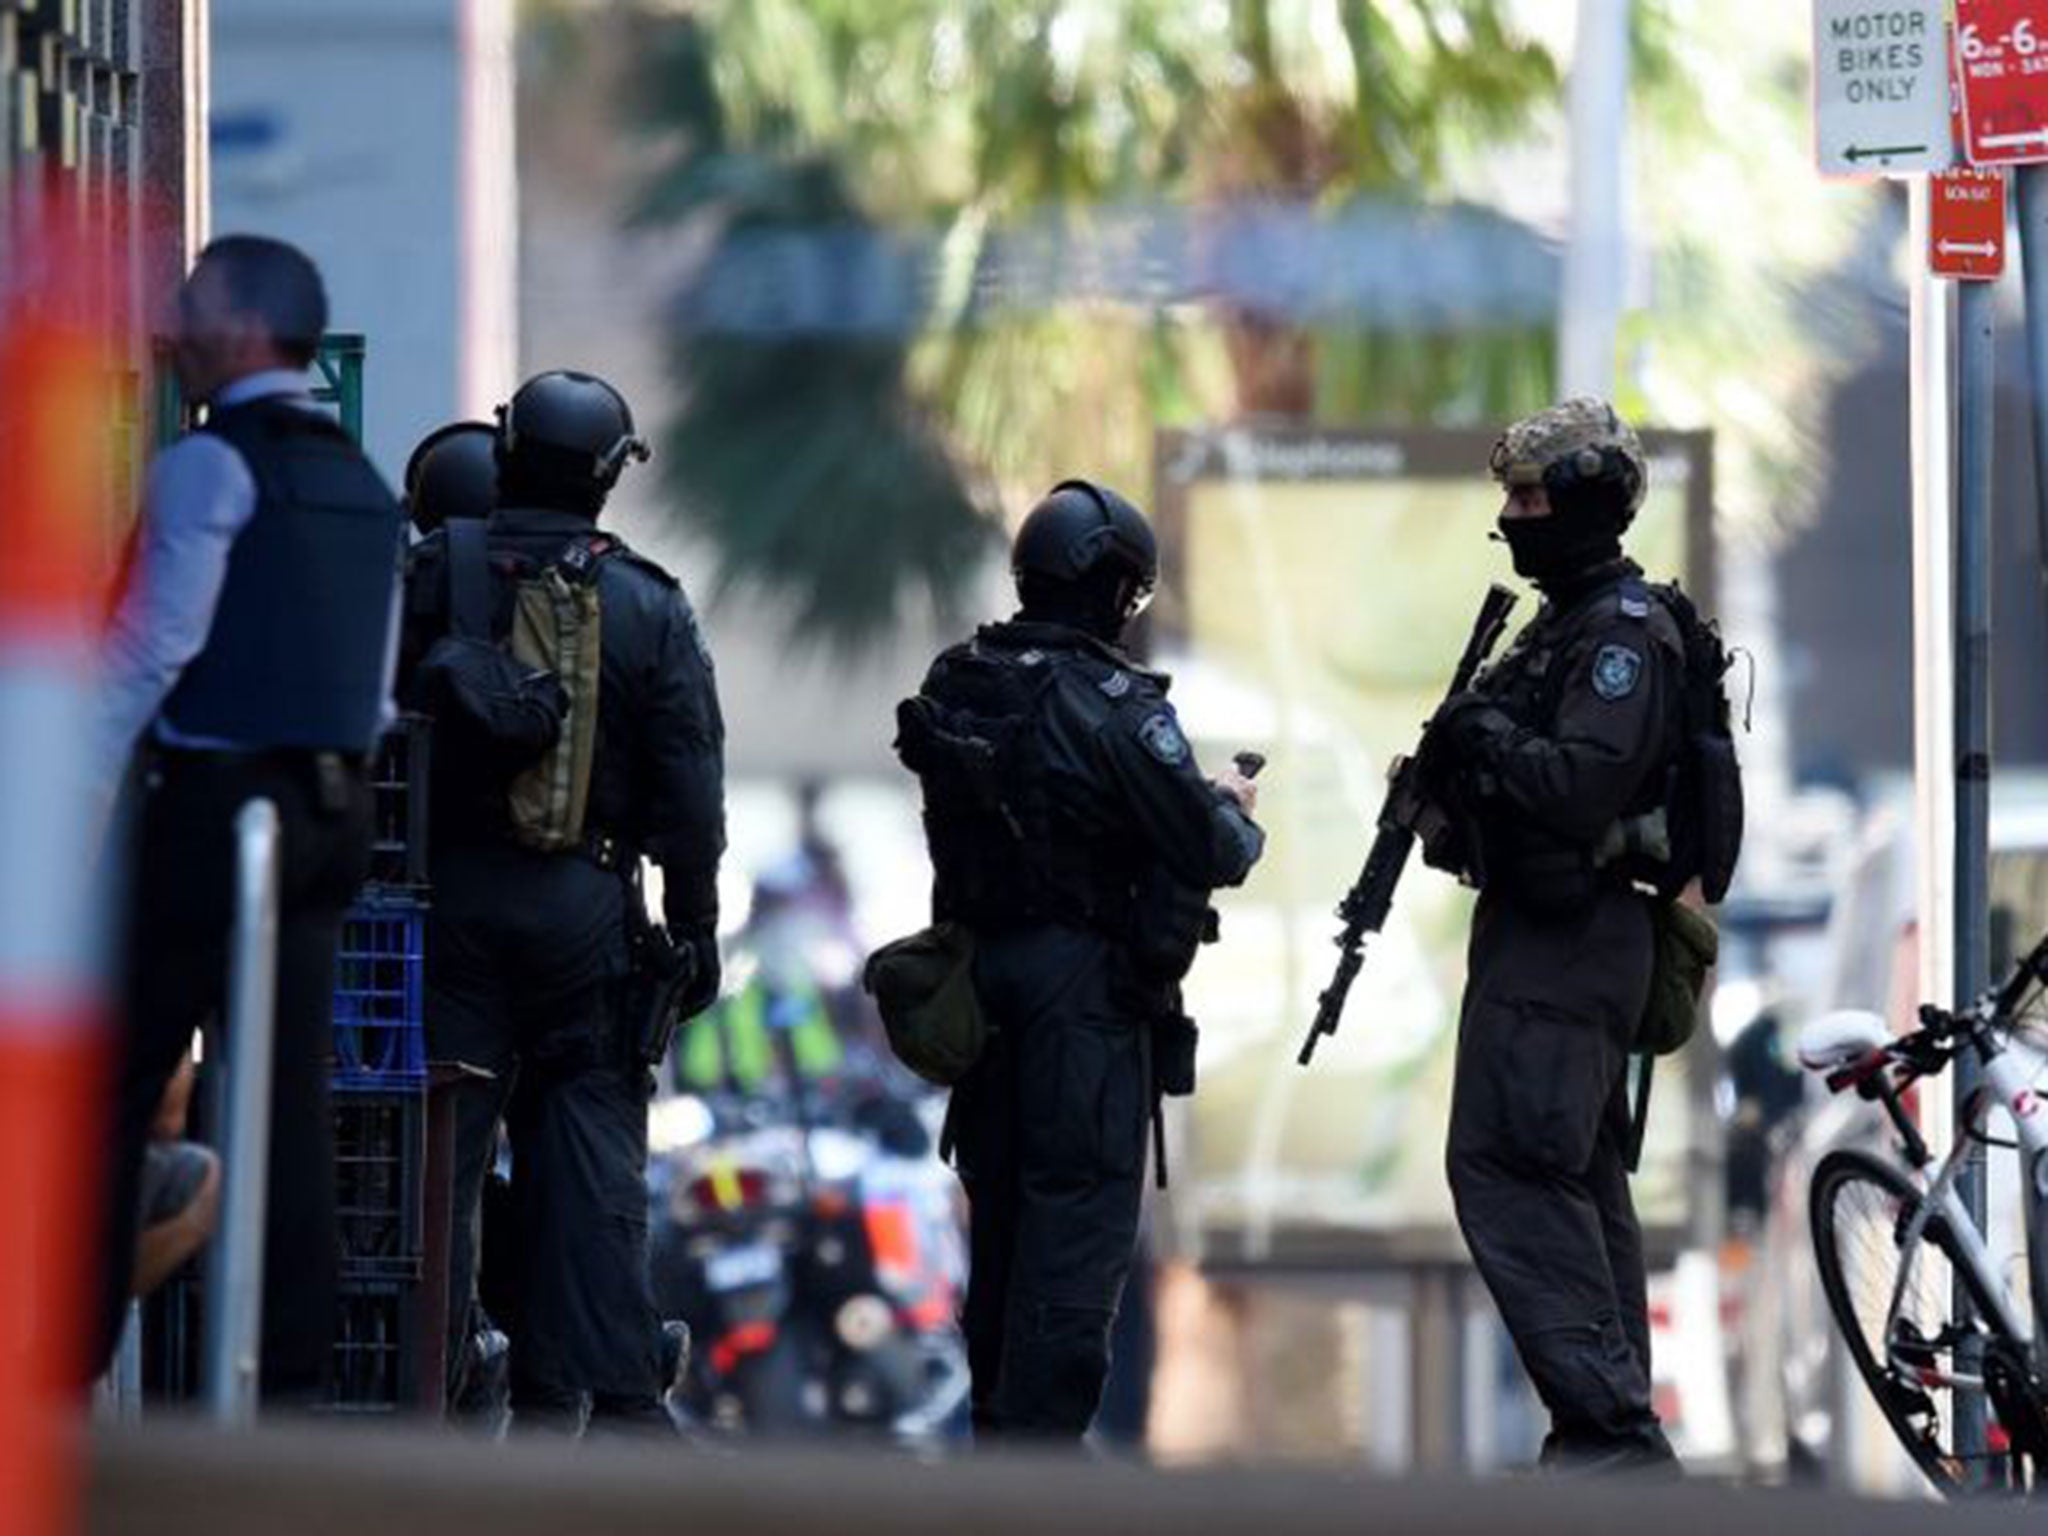 Police are called to Lindt Chocolat Cafe in Sydney's Martin Place, a busy plaza in the heart of the city